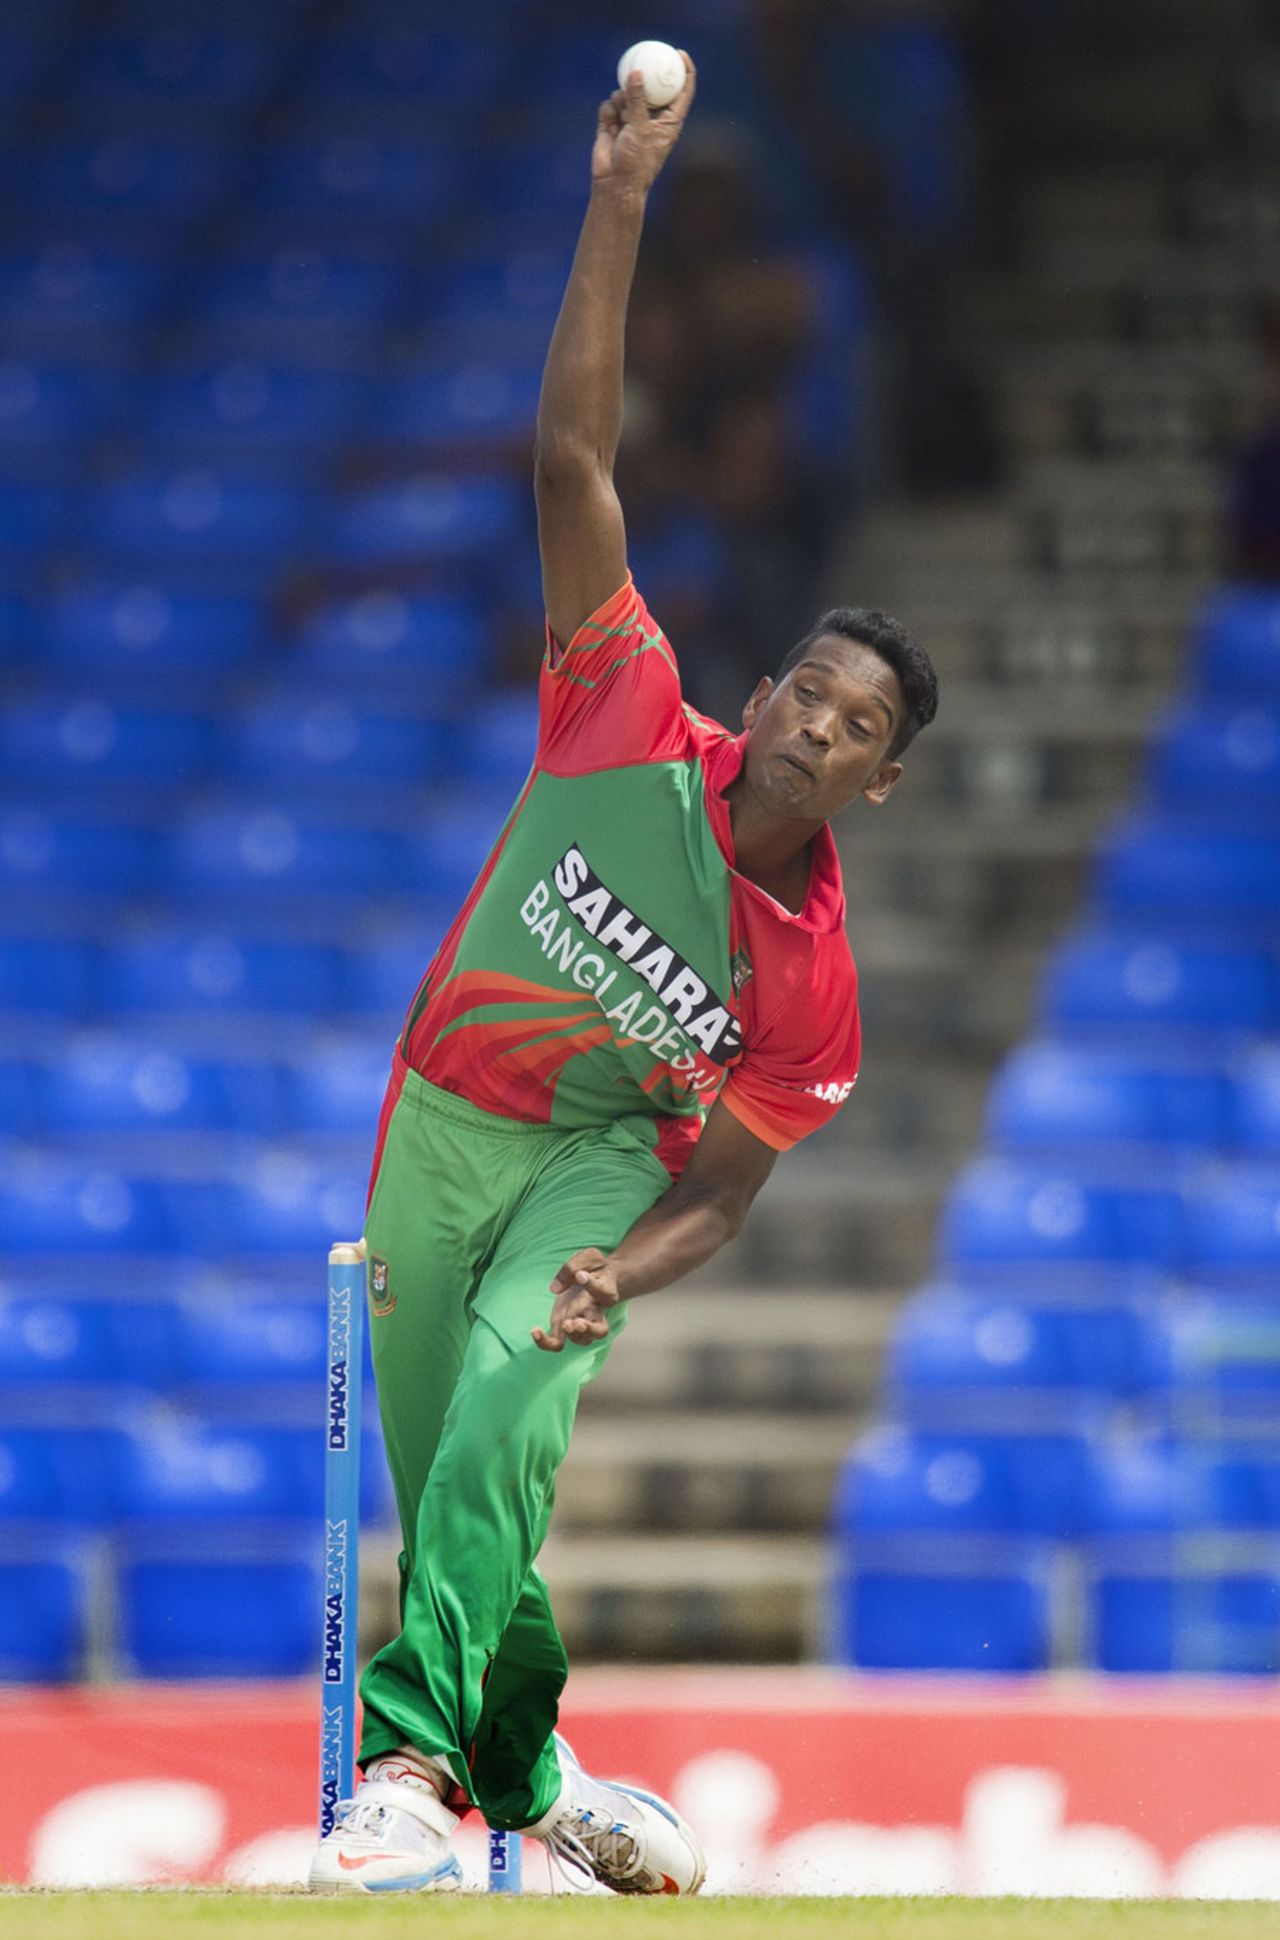 Al-Amin Hossain ended up with four wickets, West Indies v Bangladesh, 3rd ODI, Basseterre, St Kitts, August 25, 2014